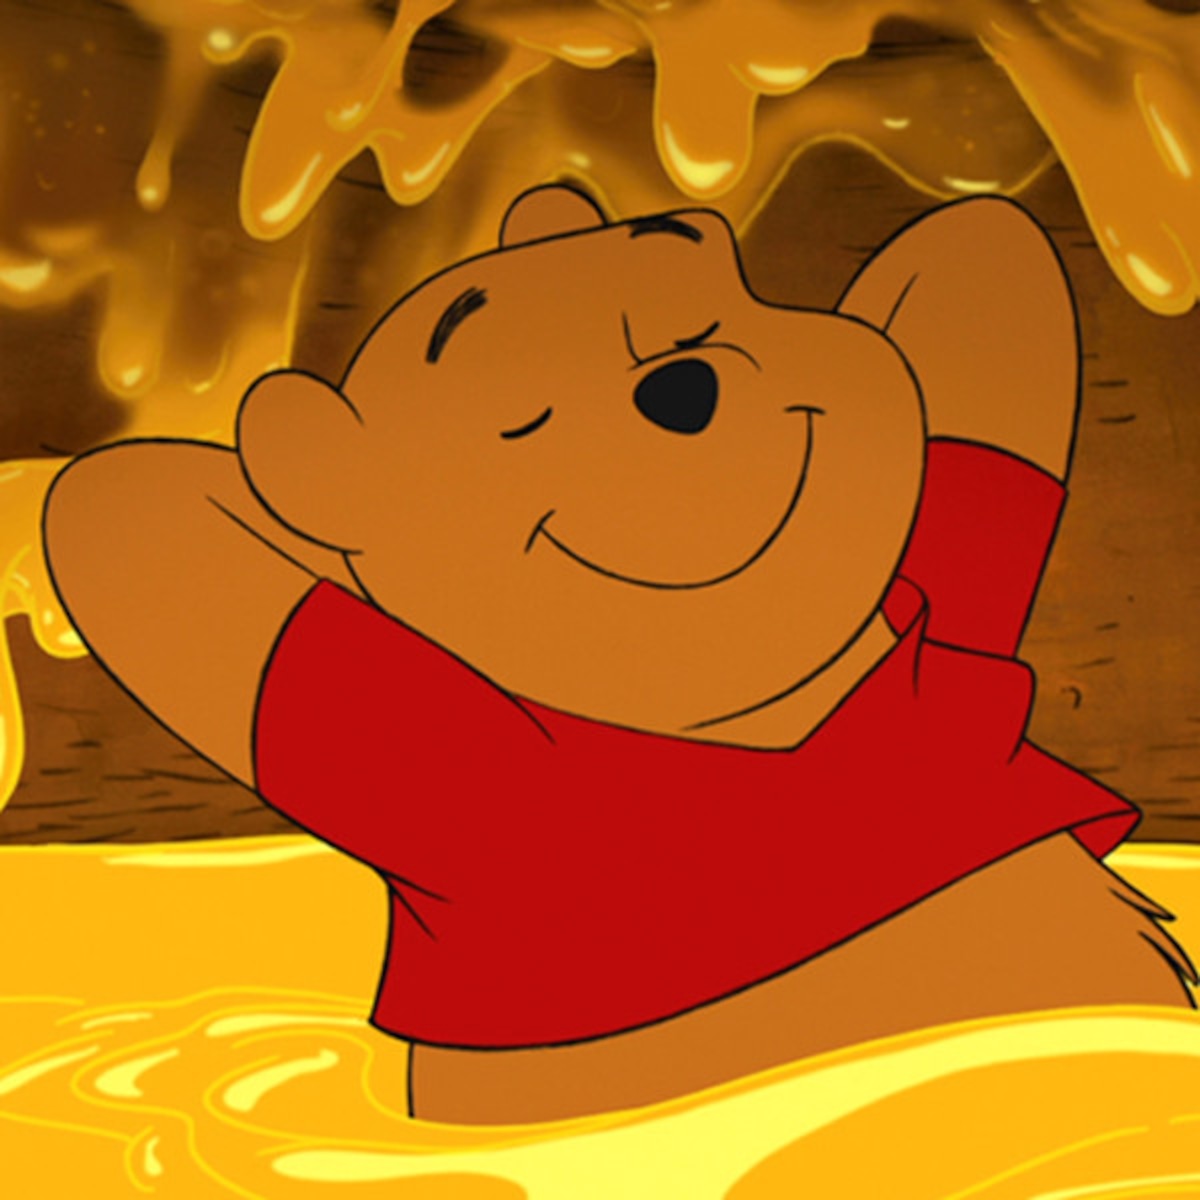 Disney Is Making a Live-Action Winnie the Pooh Movie - E! Online